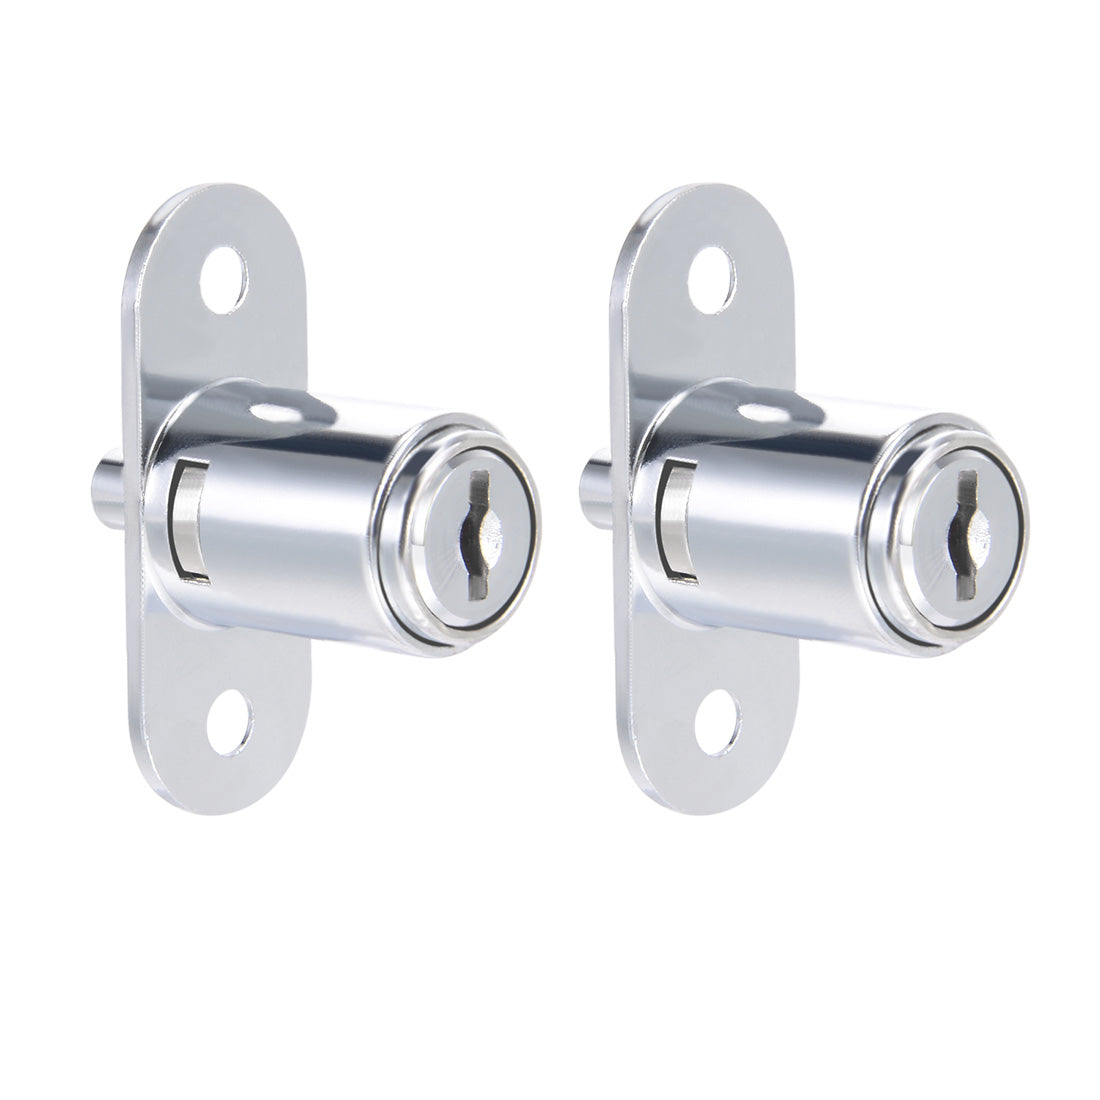 uxcell Uxcell Push Plunger Lock, 19mm x 23mm Cylinder Zinc Alloy Keyed Different 2Pcs